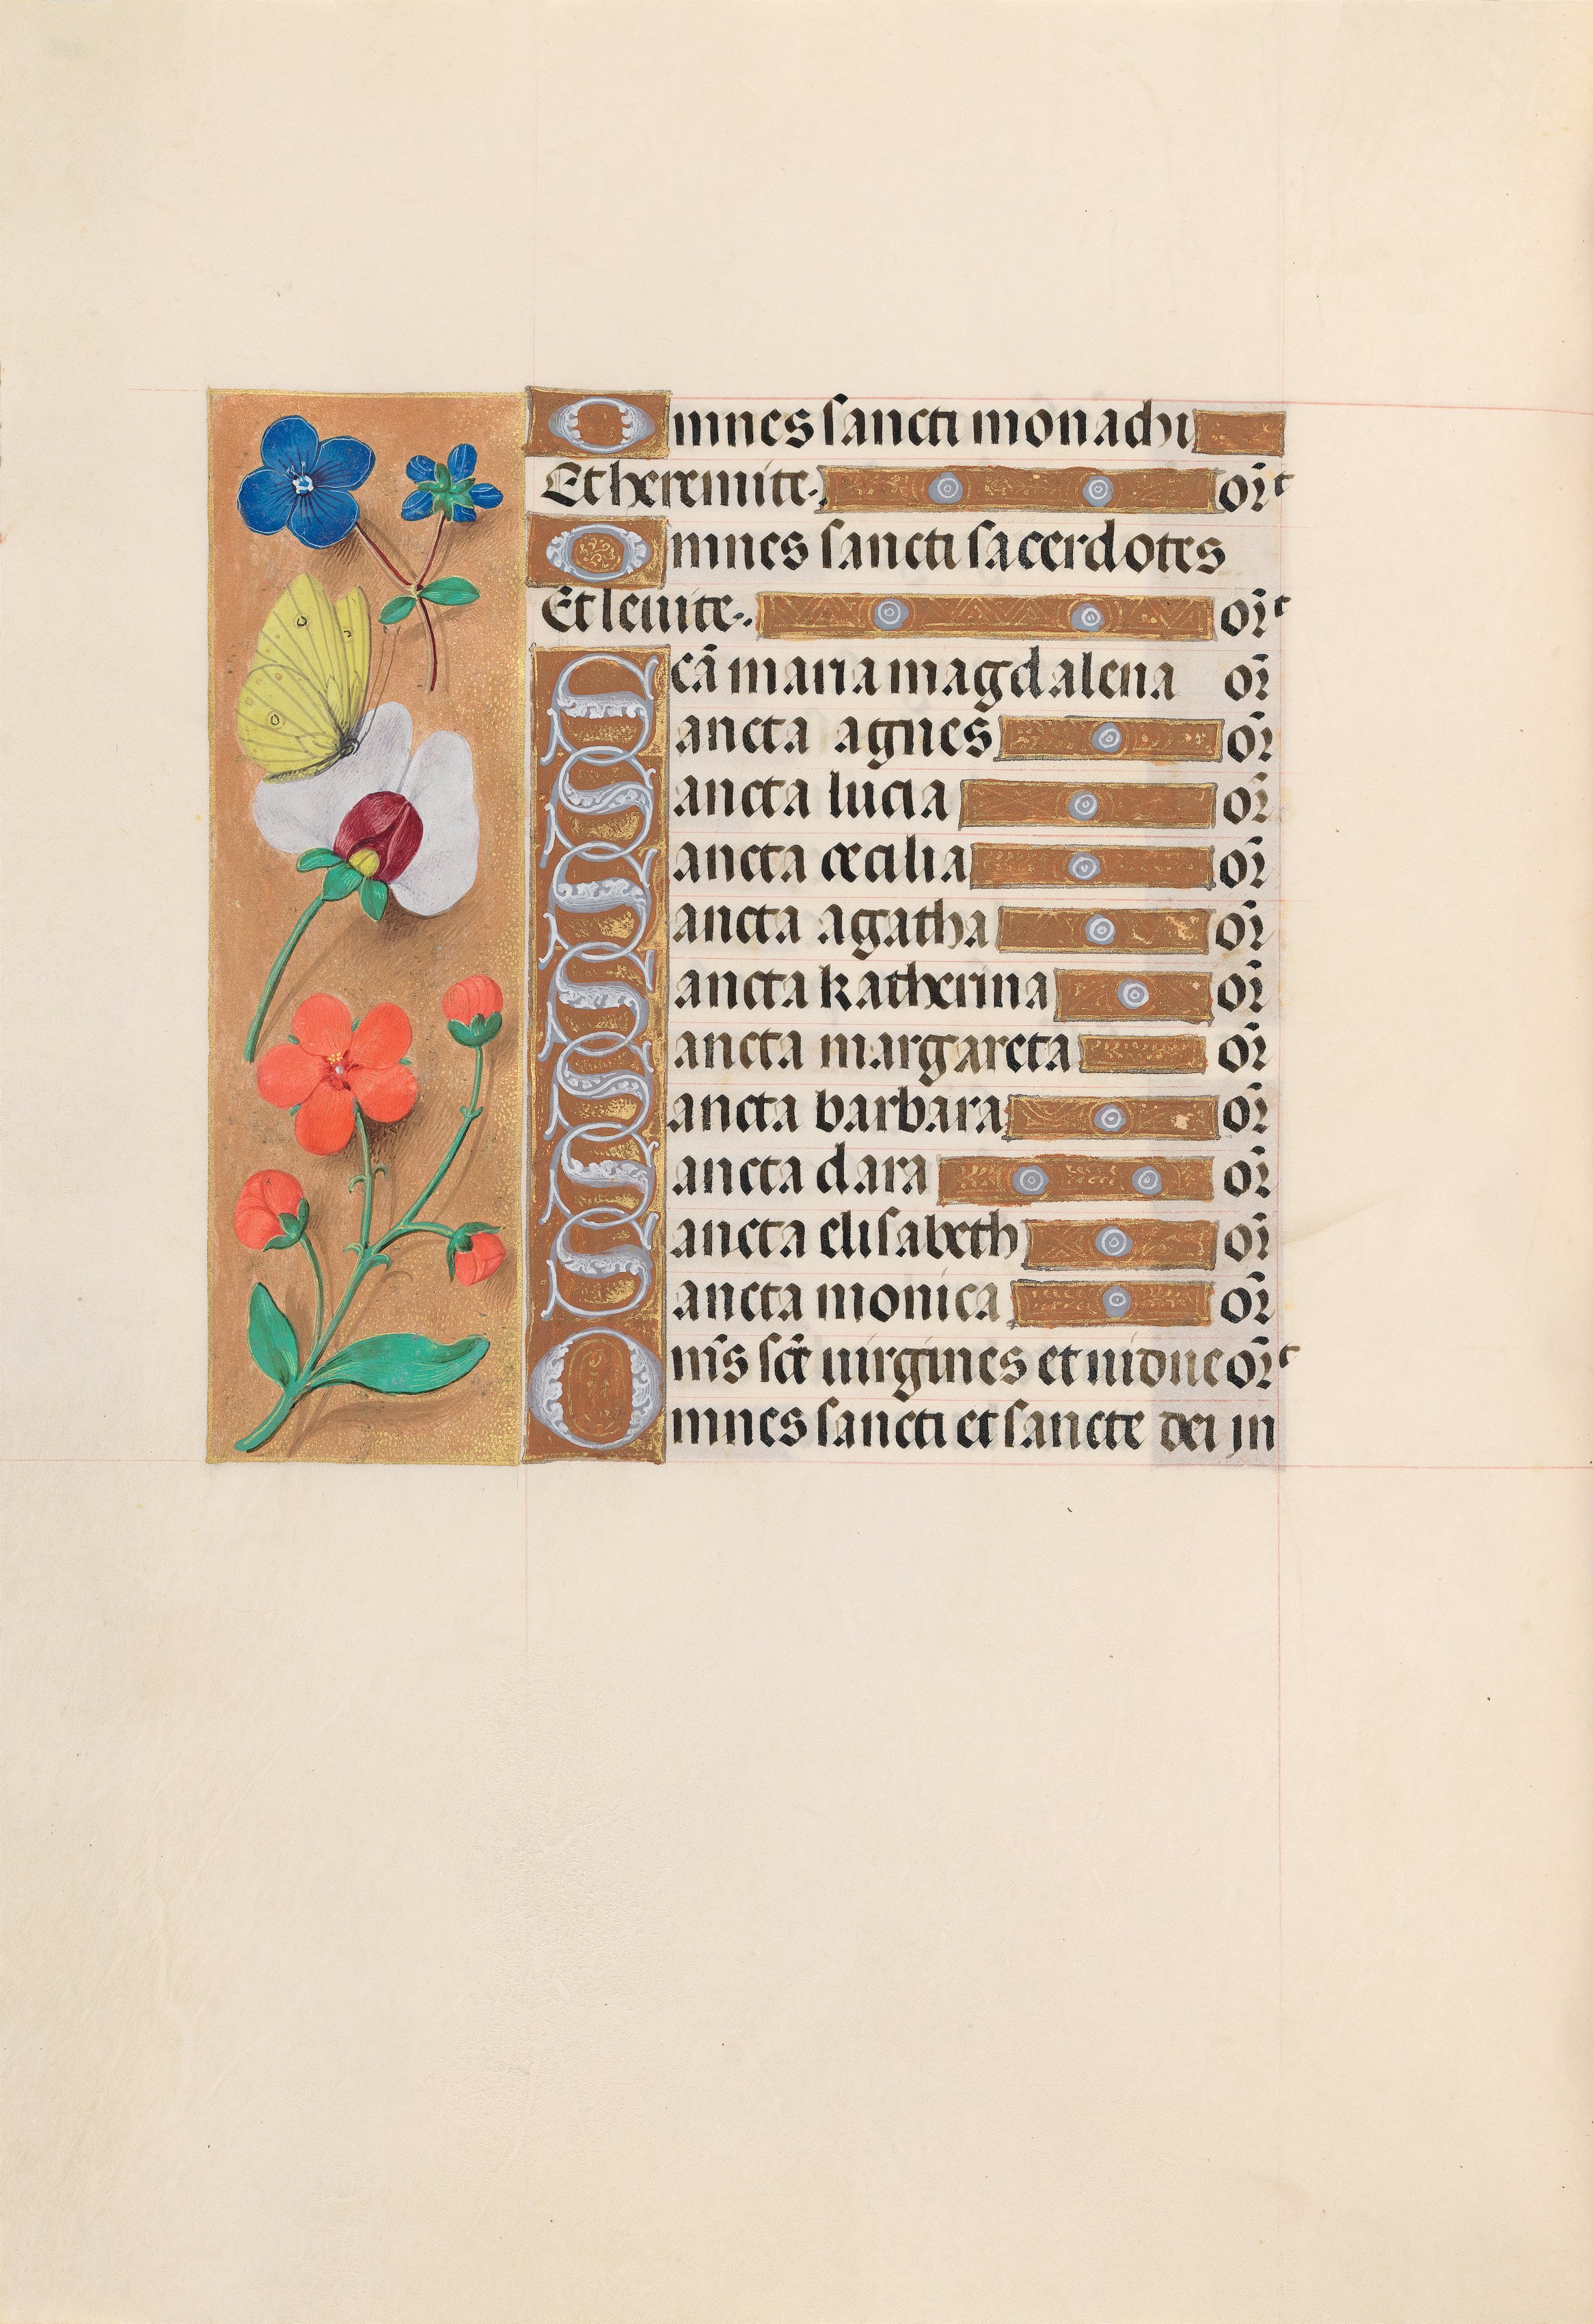 Hours of Queen Isabella the Catholic, Queen of Spain:  Fol. 212v